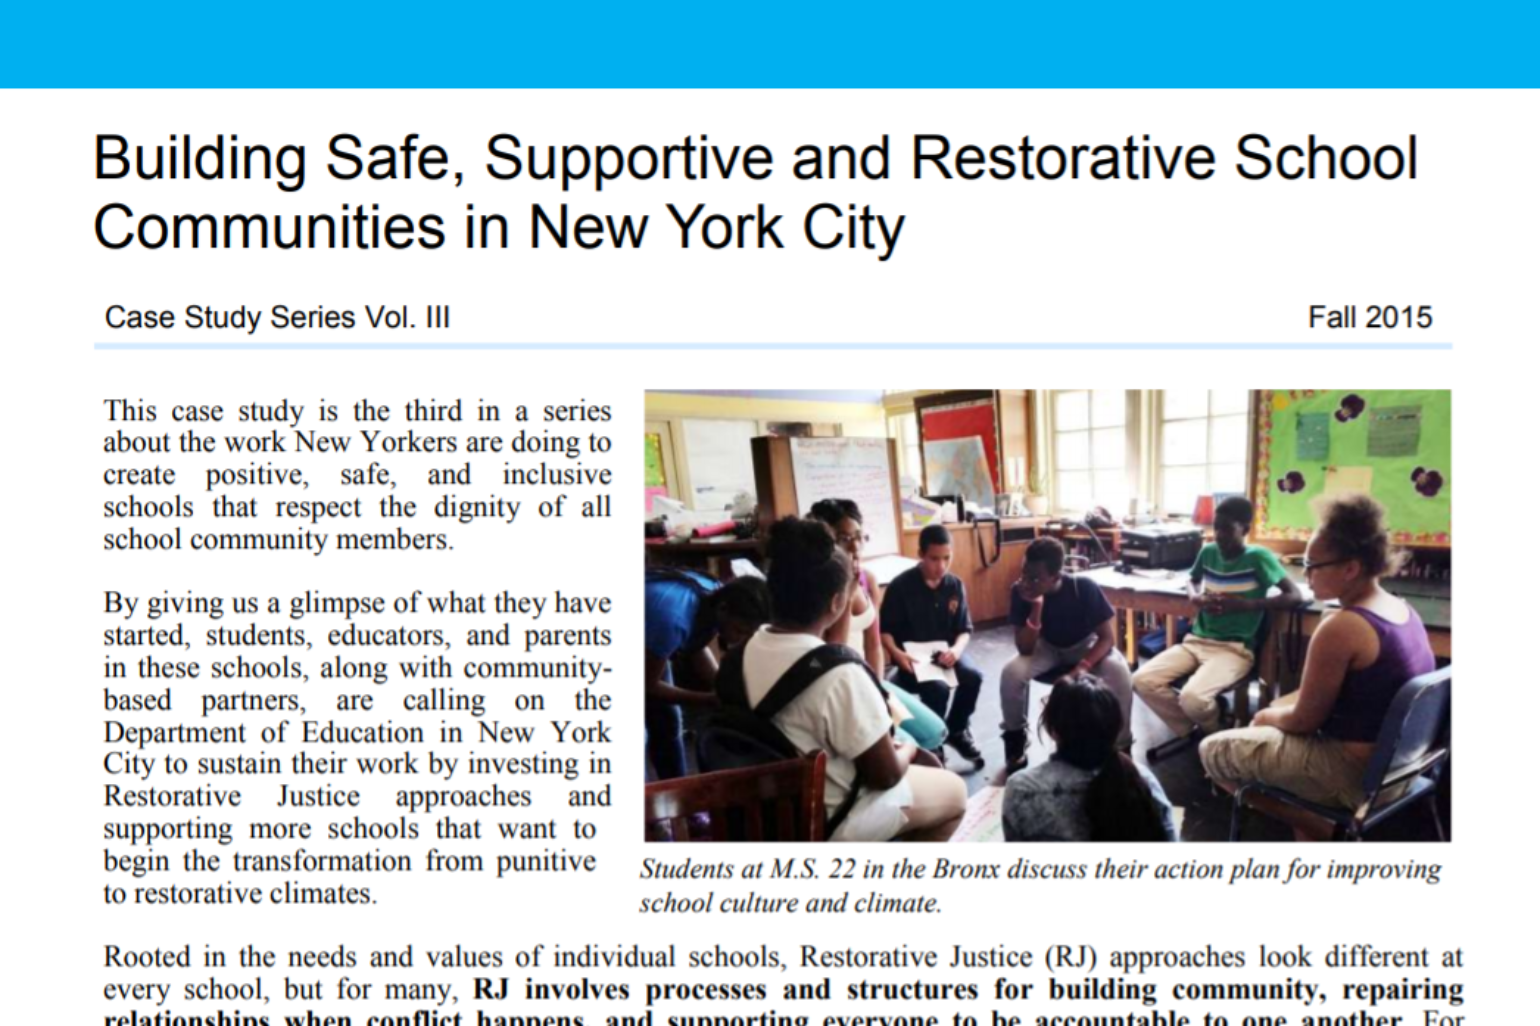 DSC NY- Building Safe, Supportive and Restorative School Communities in New York City, Vol. III